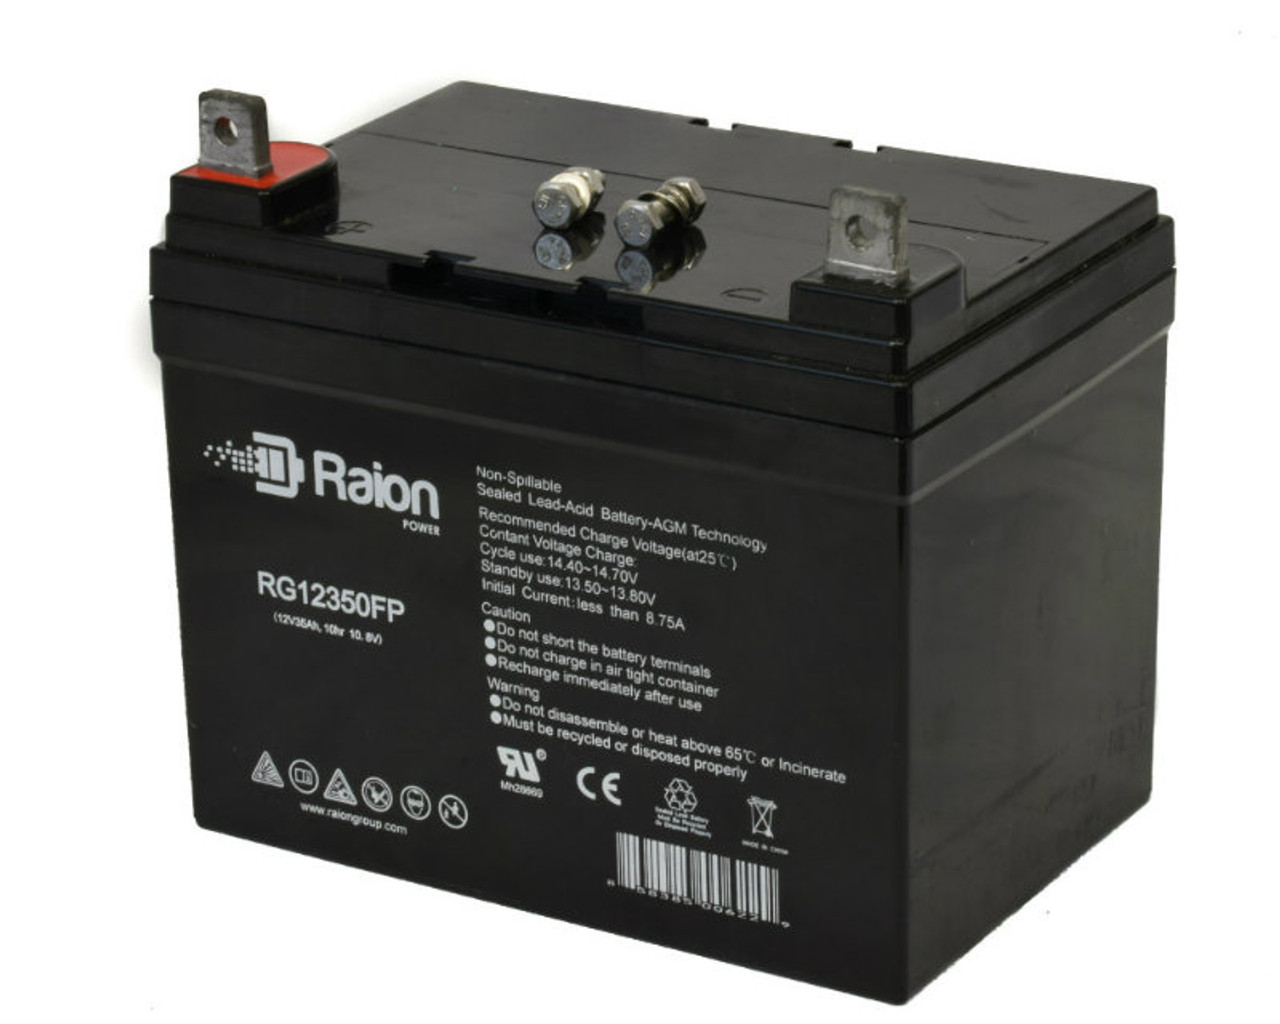 Raion Power Replacement 12V 35Ah Battery for Raion Power RG12350FP - 1 Pack